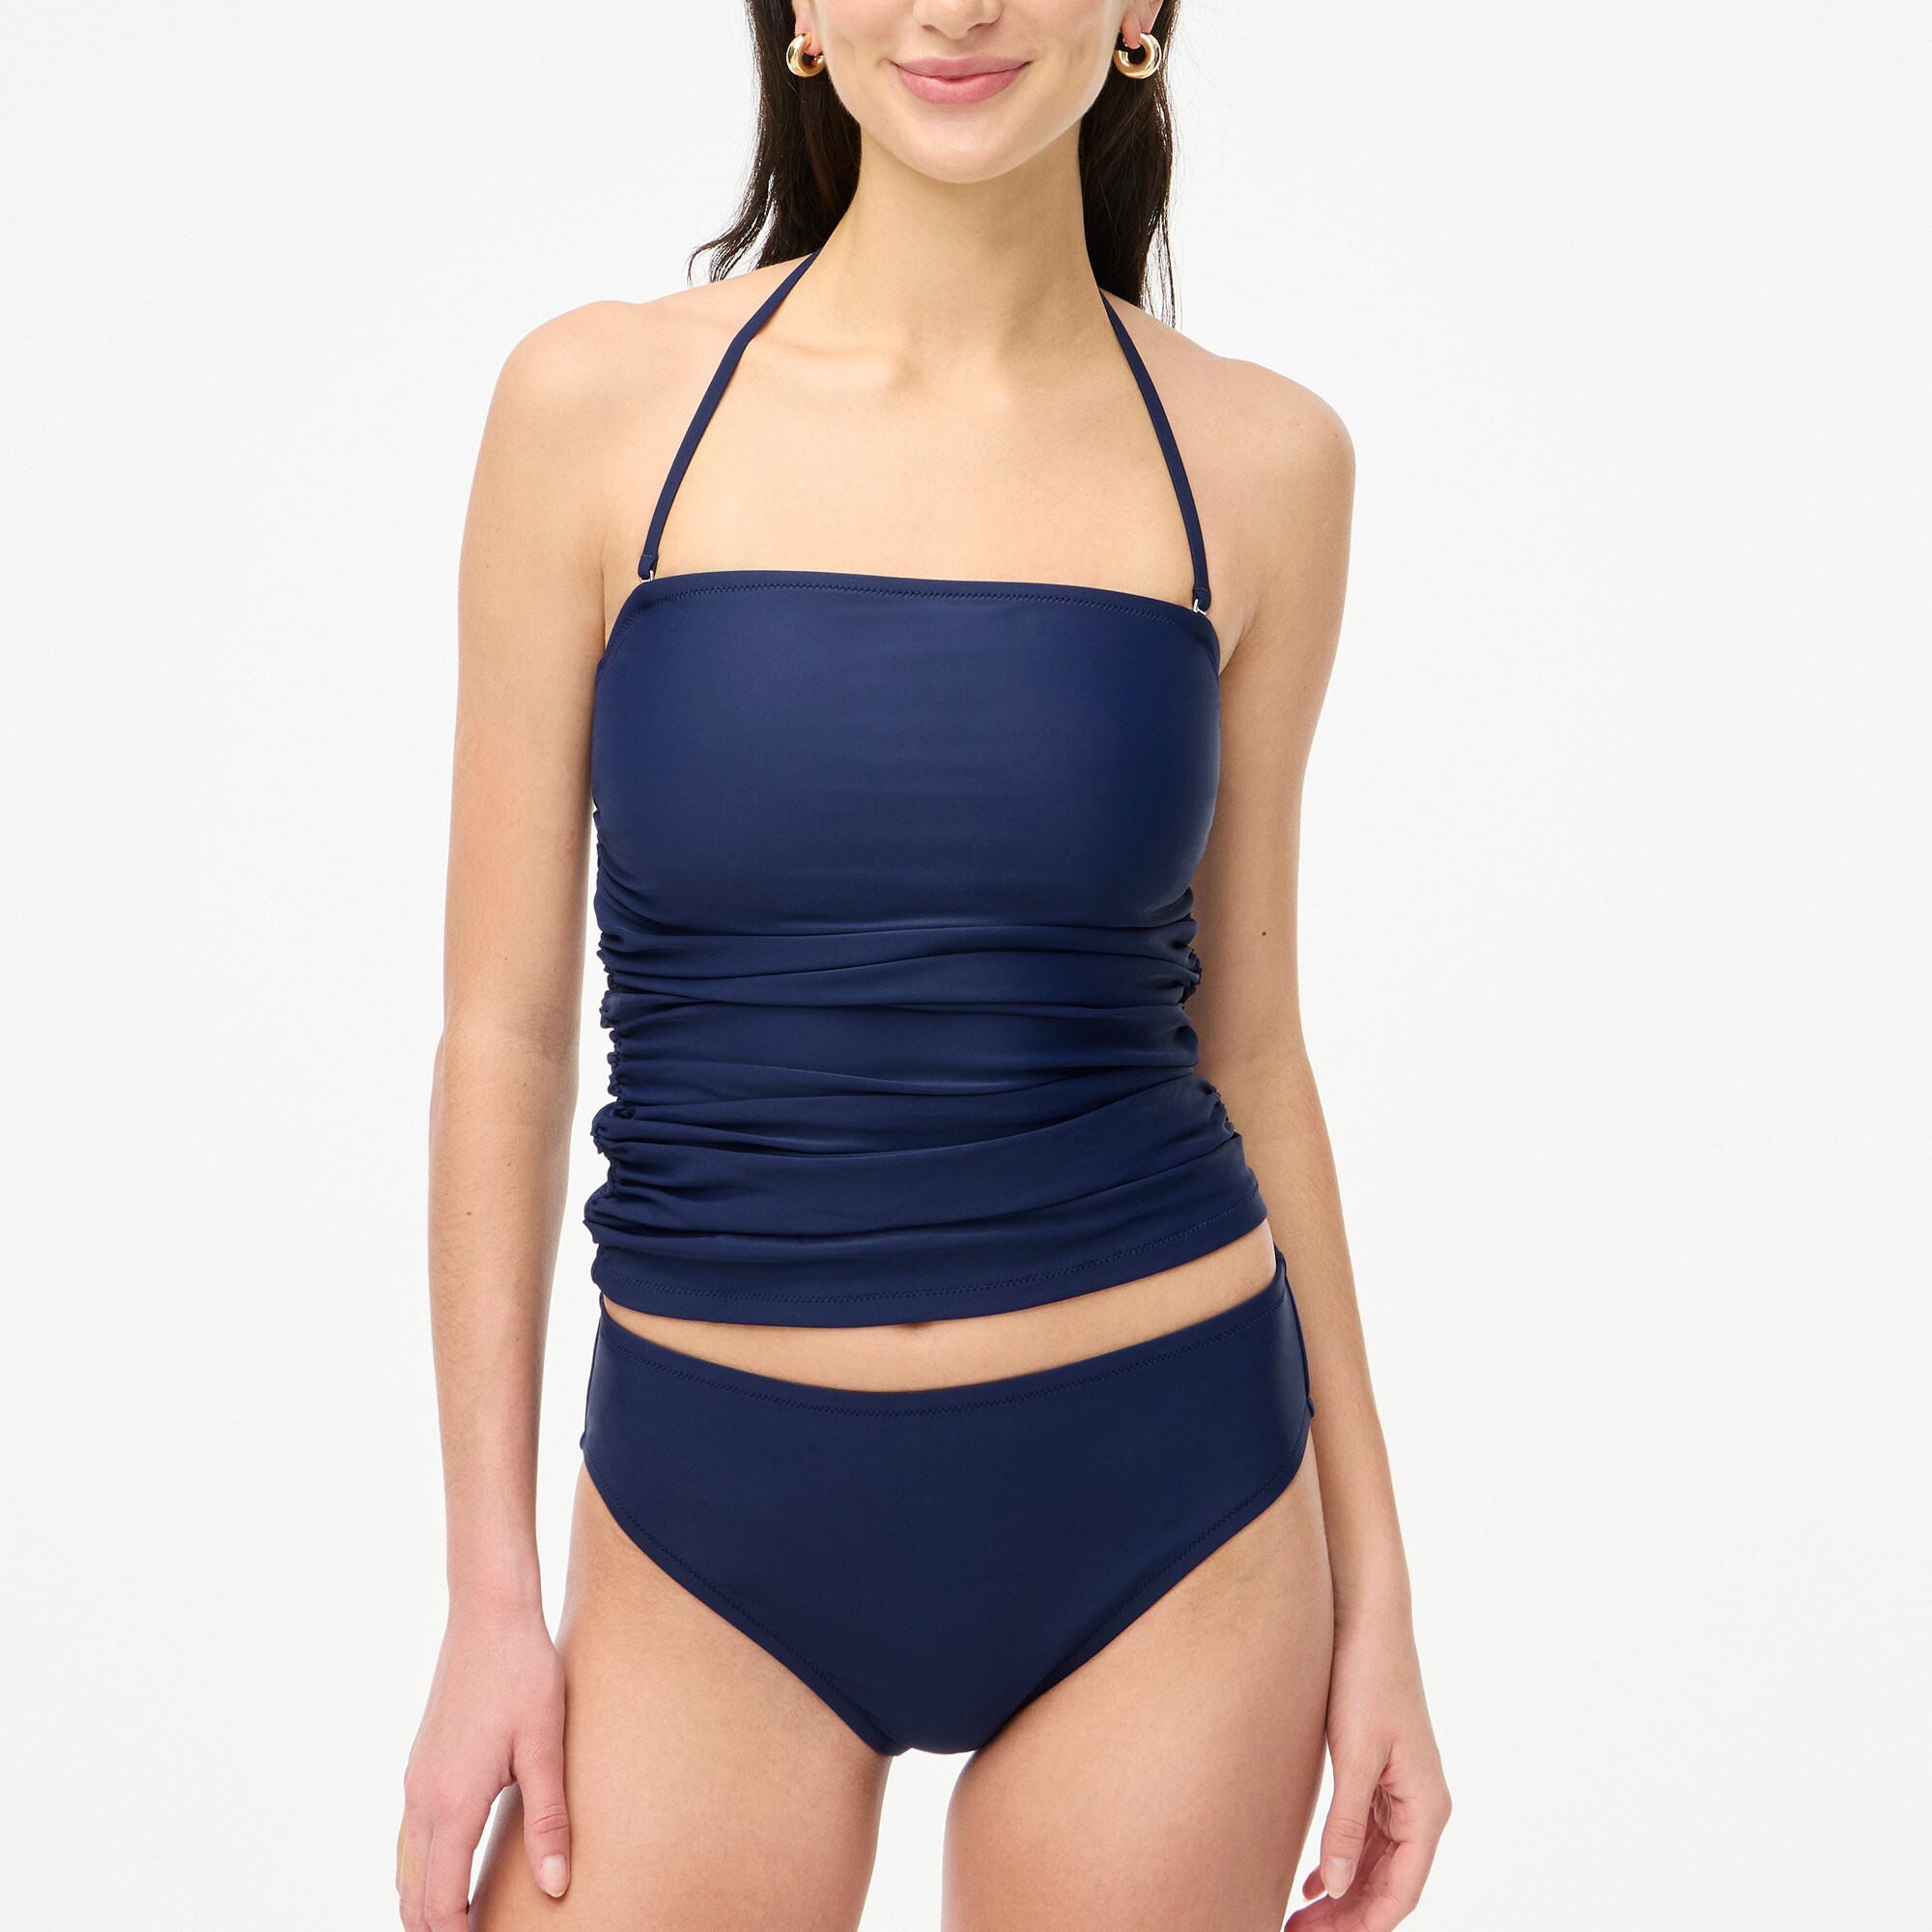  Solid strapless tankini top